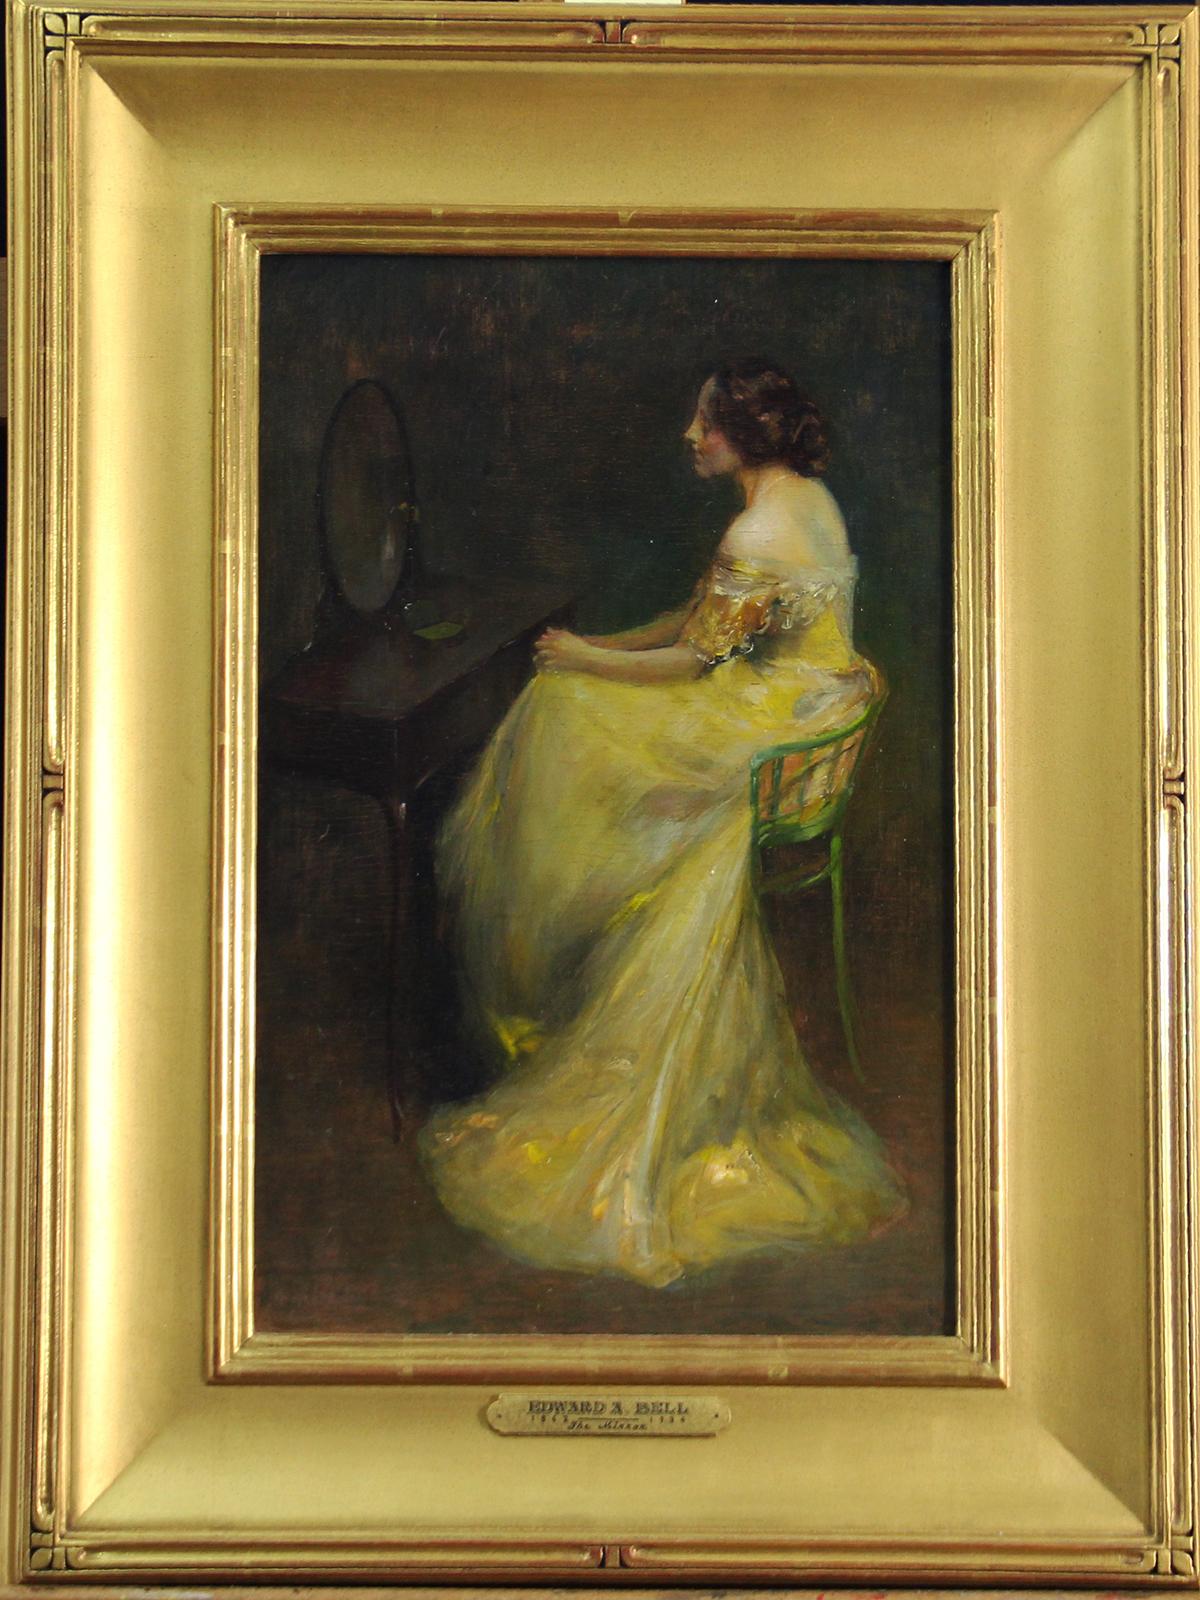 Edward Bell Portrait Painting - The Mirror, 19th Century Impressionist Female Portrait, Oil on Board, Framed